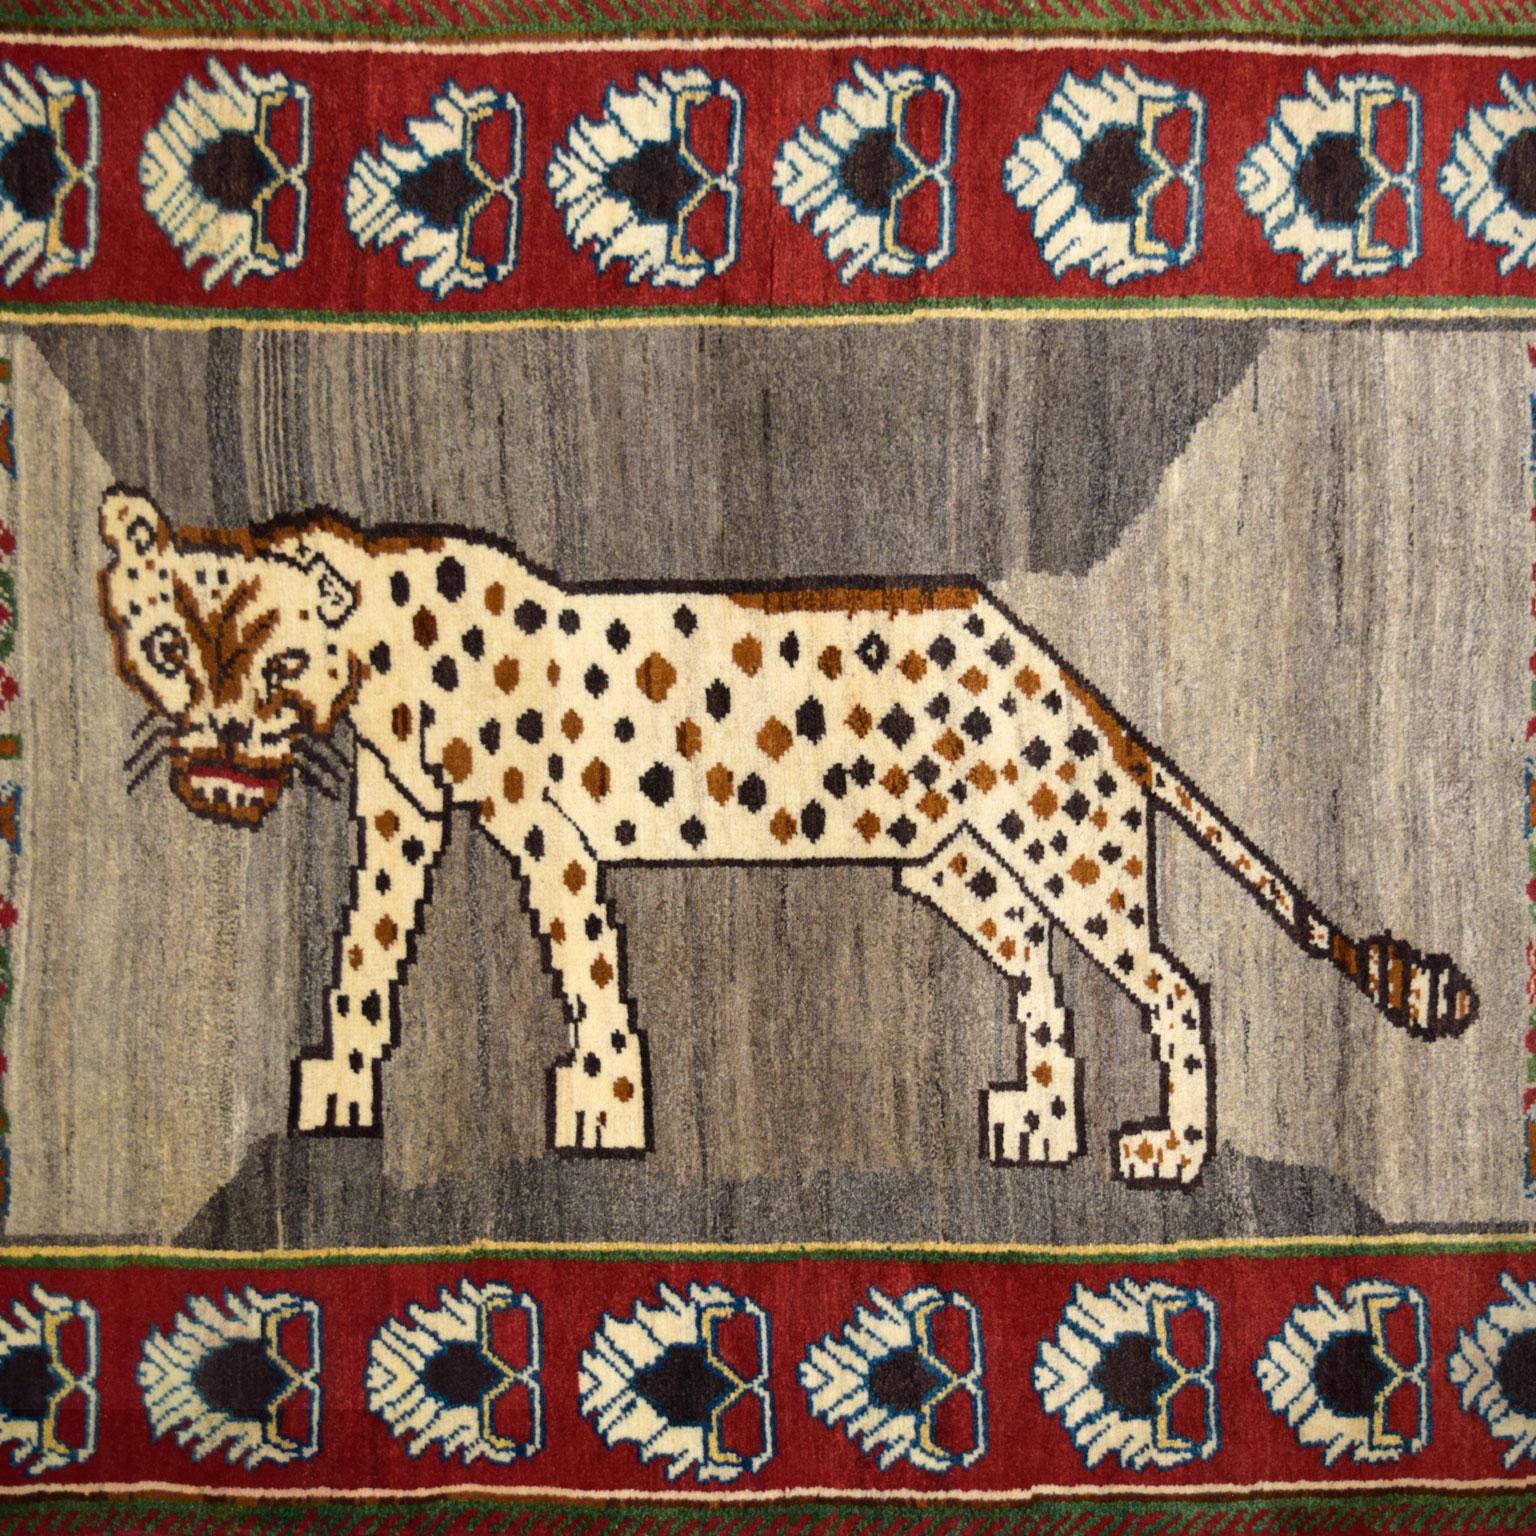 Hand-knotted in red, cream, grey, brown, green, blue, and gold handspun wool, this Persian Qashqai carpet measures 3’8” x 5’11” and features a distinctive prowling leopard design. Plush, functional, and resilient in quality, the hand-knotted weave